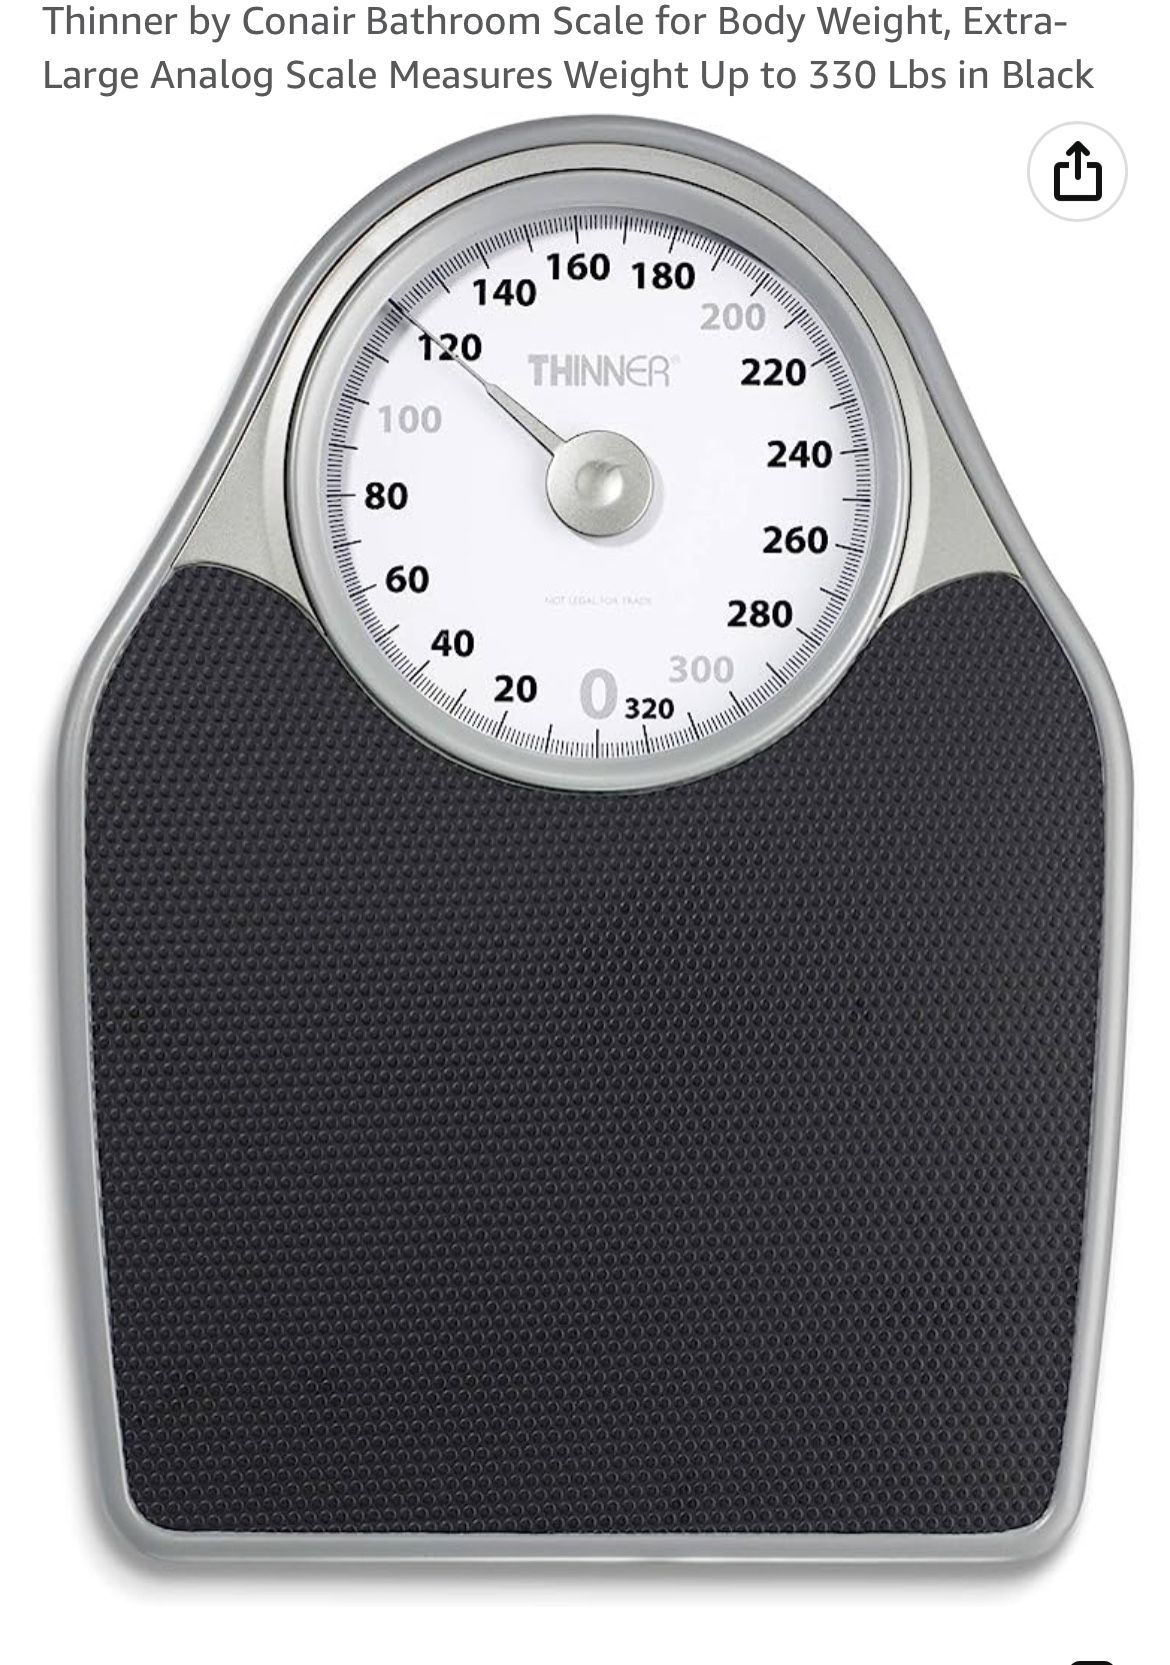 Connair Thinner Portable Digital Scale - model TH203 for Sale in North  Lauderdale, FL - OfferUp